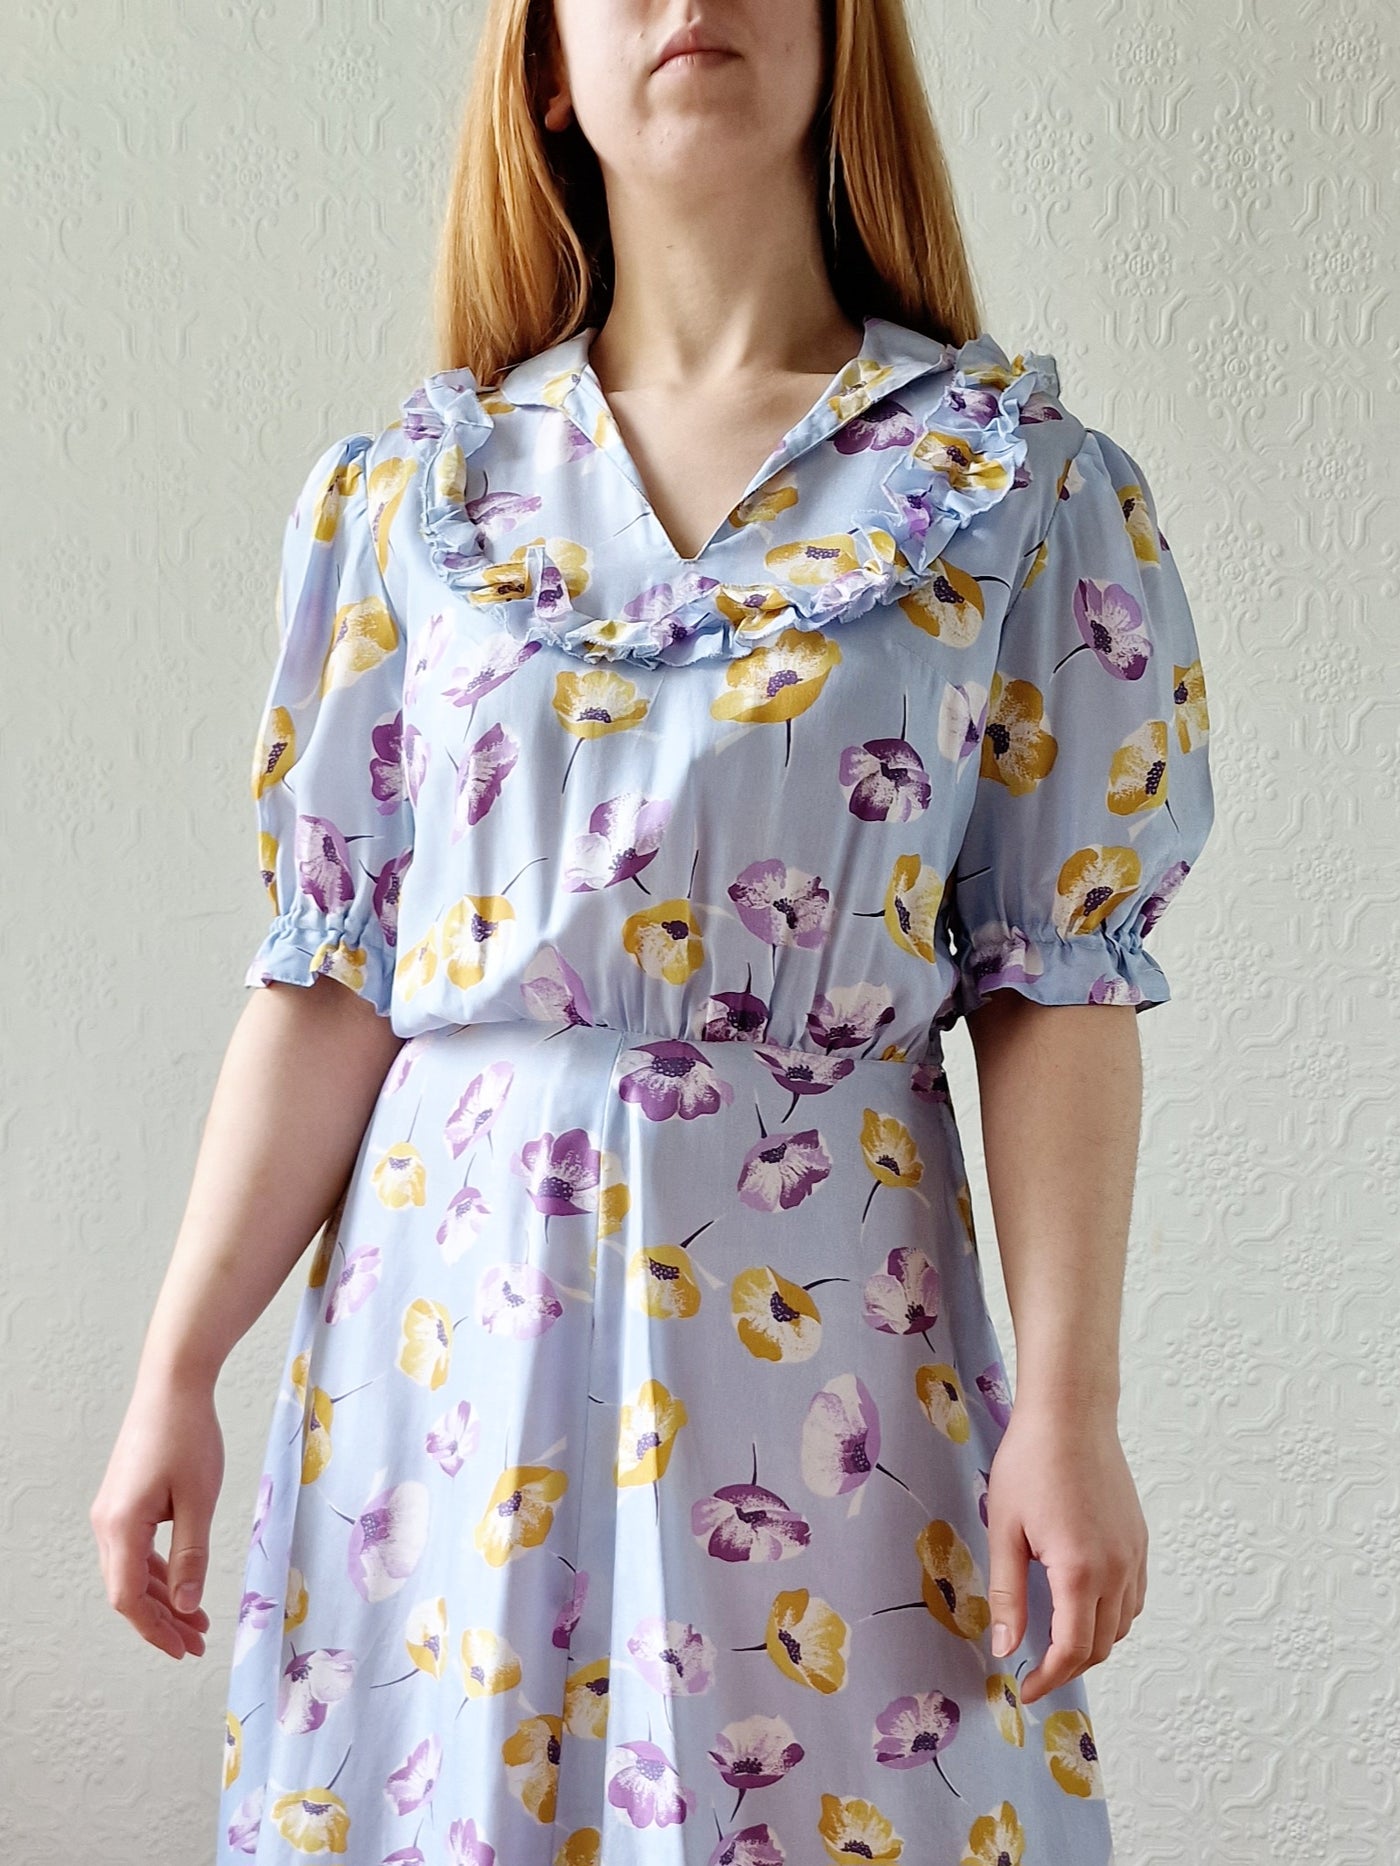 Vintage 70s Light Blue Floral Dress with Puff Sleeves - S/M